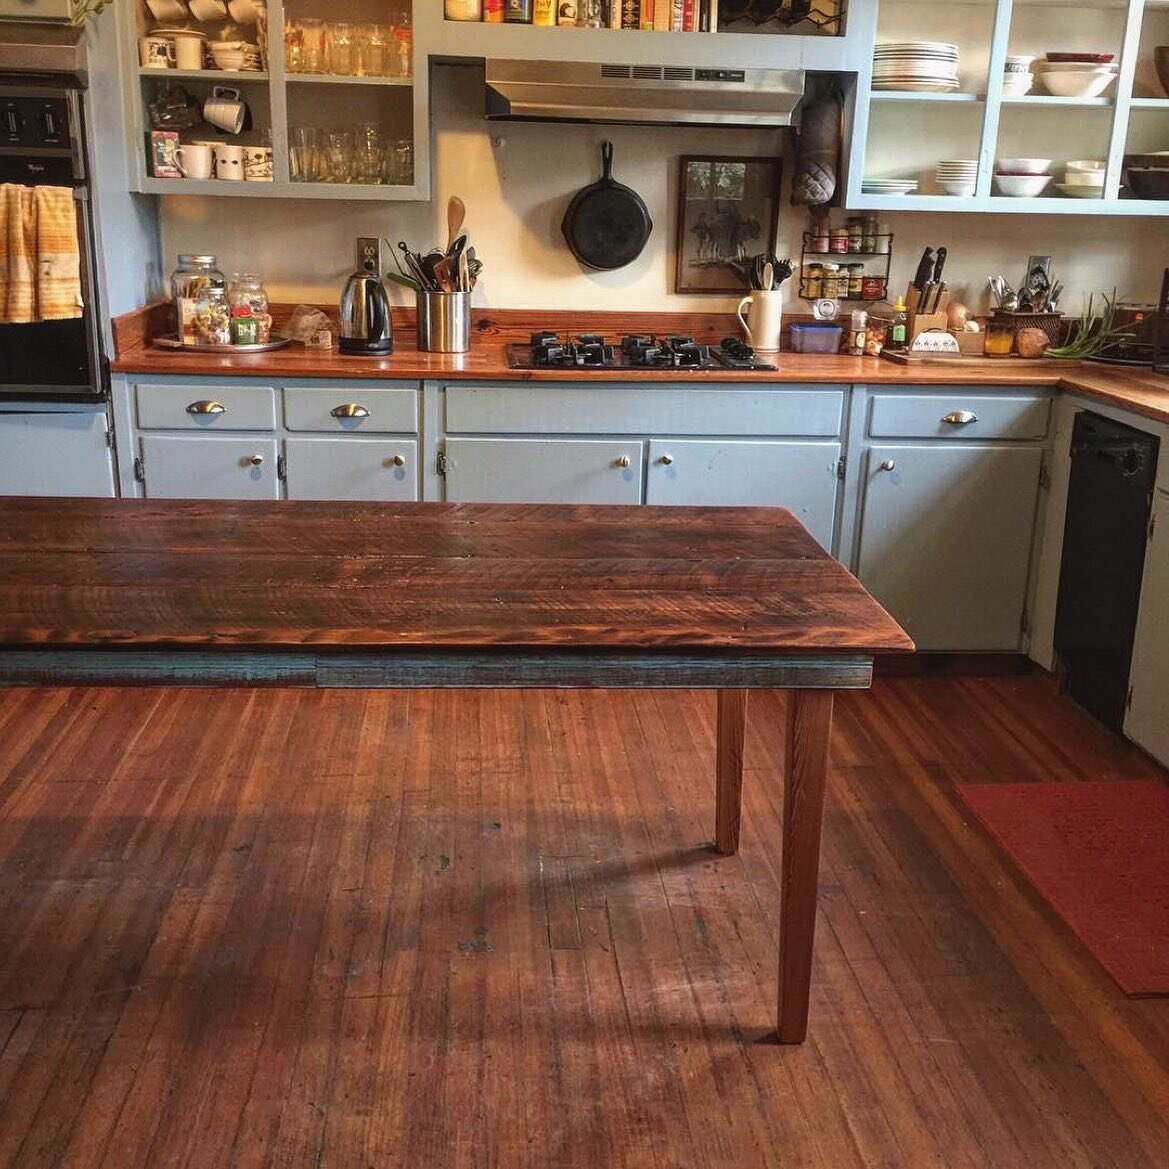 Reclaimed heart pine farm table with authentic &quot;haint blue&quot; beadboard skirt that was reclaimed from historic porches. Beams and top are made from 200 year old structural wood from some of the earlier buildings of Savannah.